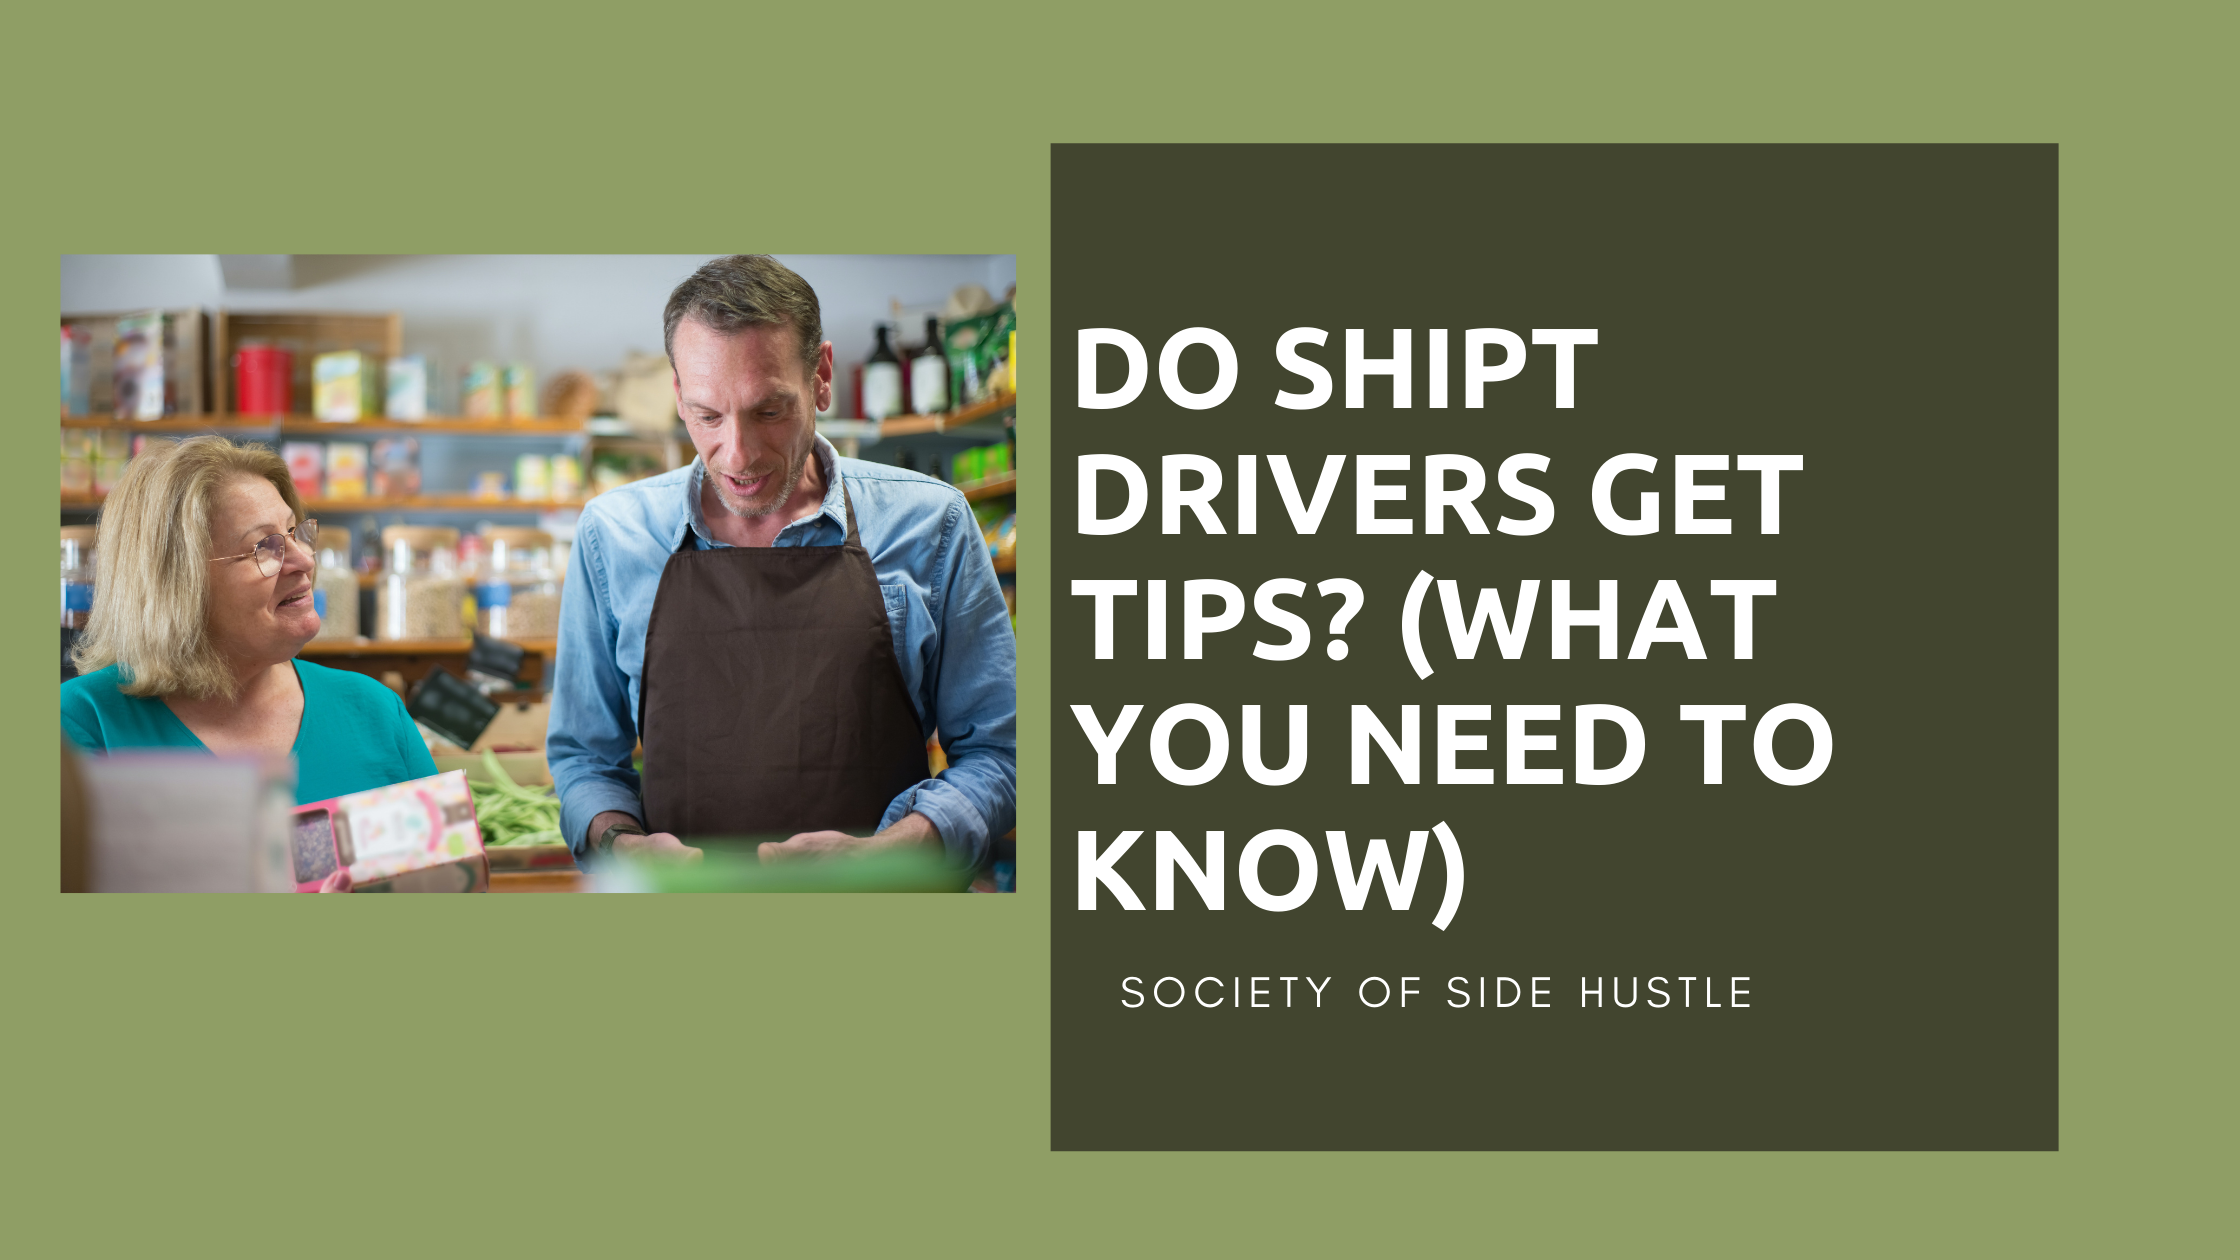 Do Shipt Drivers Get Tips? (What You Need To Know)